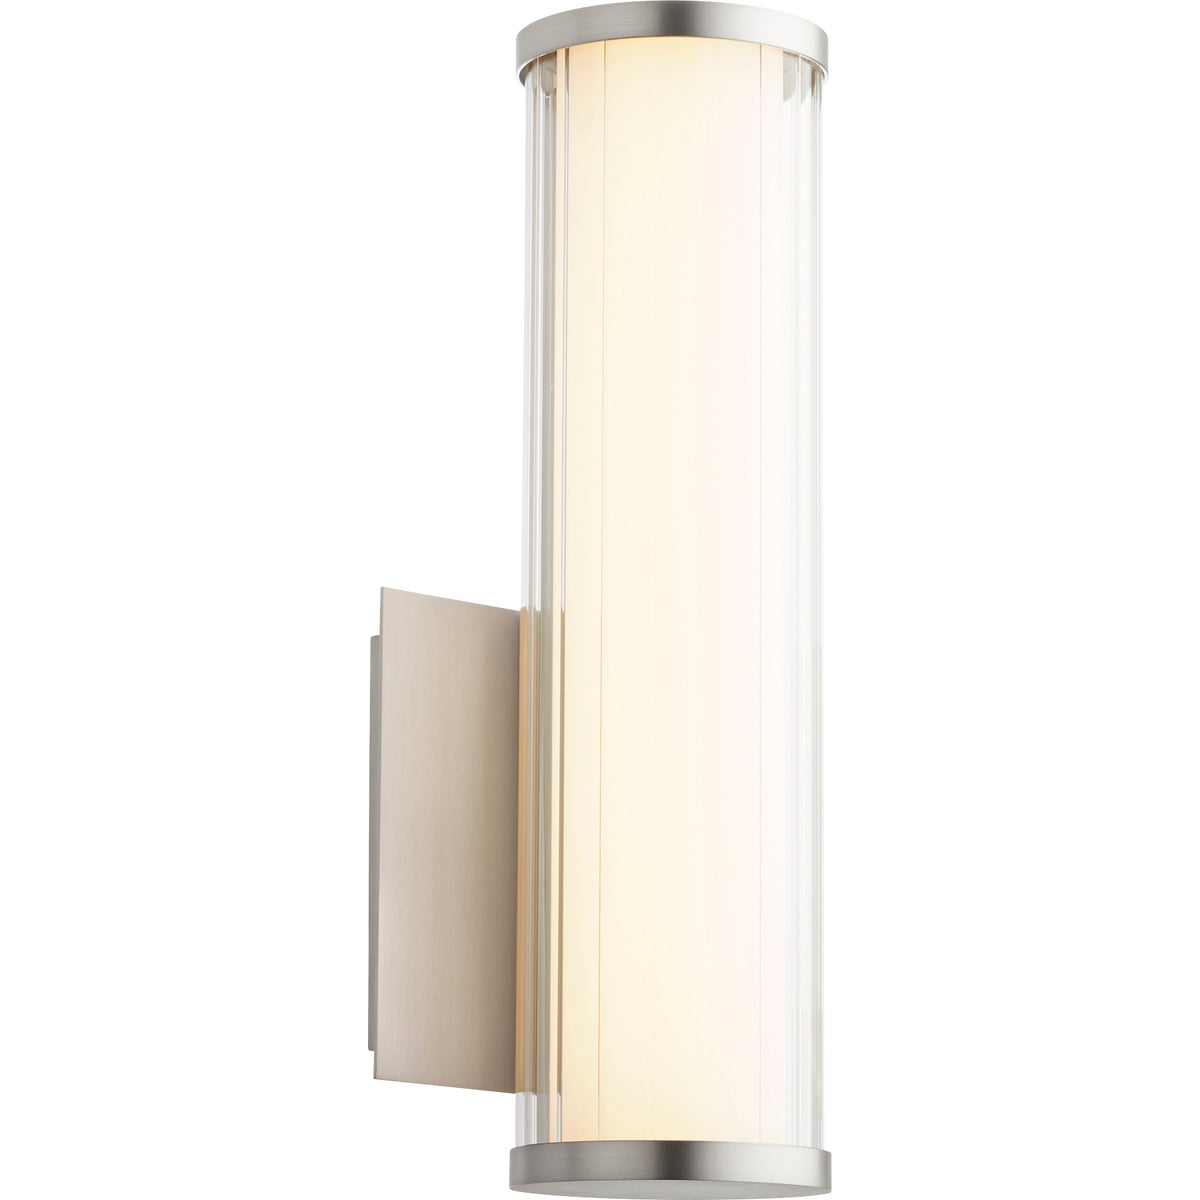 LED Wall Sconce with clean lines and subtle sophistication, perfect for modern applications. 9W, 120V, 689 lumens, 3000K color temperature, CRI 90. Dimmable, UL Listed for damp locations. Noir, Oiled Bronze, Polished Nickel, or Satin Nickel finish. 5.13"W x 12.5"H x 4"E. 2-year warranty.